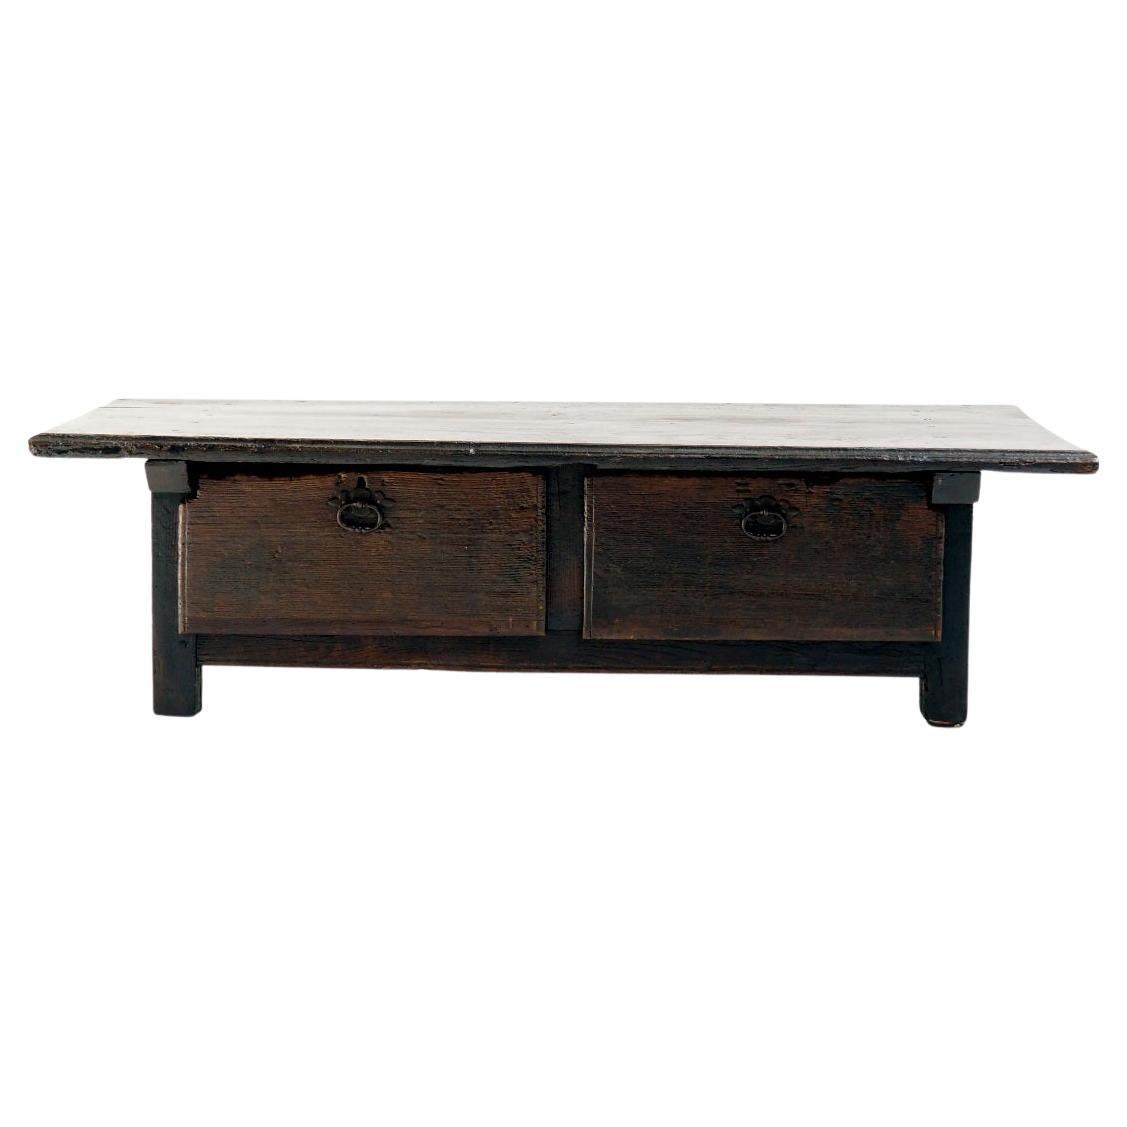 18th Century Coffee Table made from a Banker or Merchant’s Table For Sale